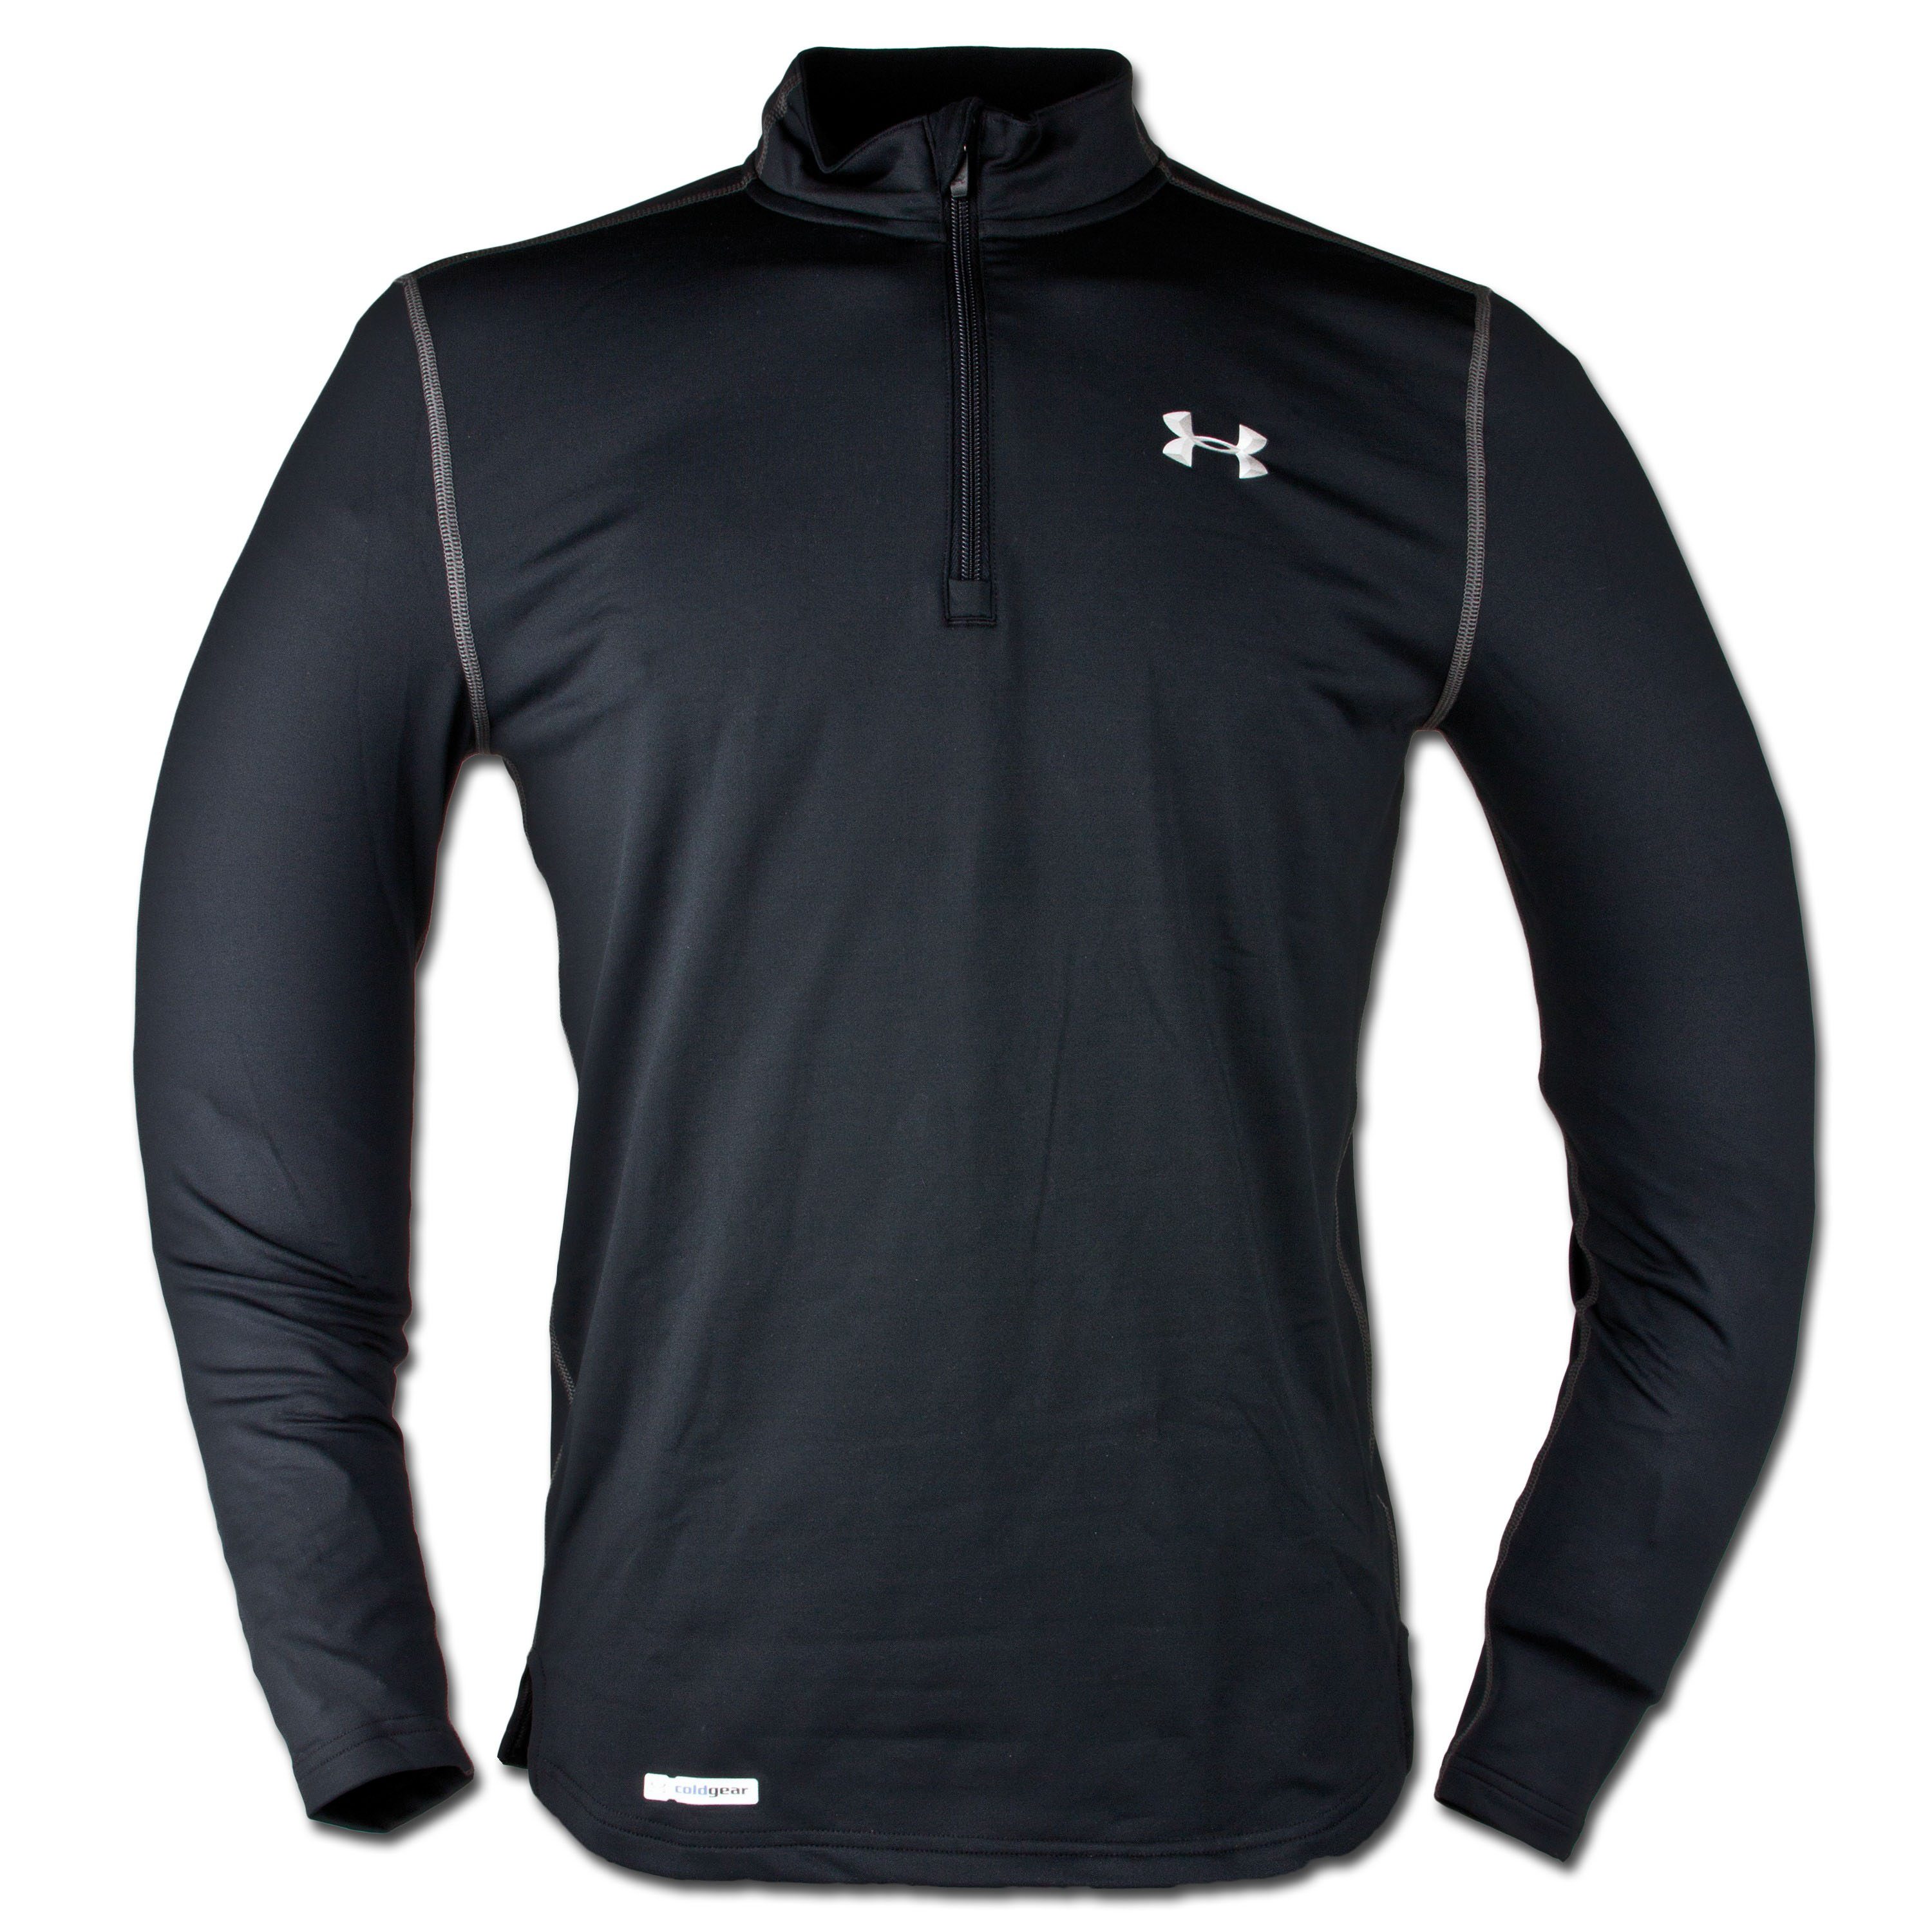 Under Armour Zip-Shirt fitted ColdGear black | Under Armour Zip-Shirt ...